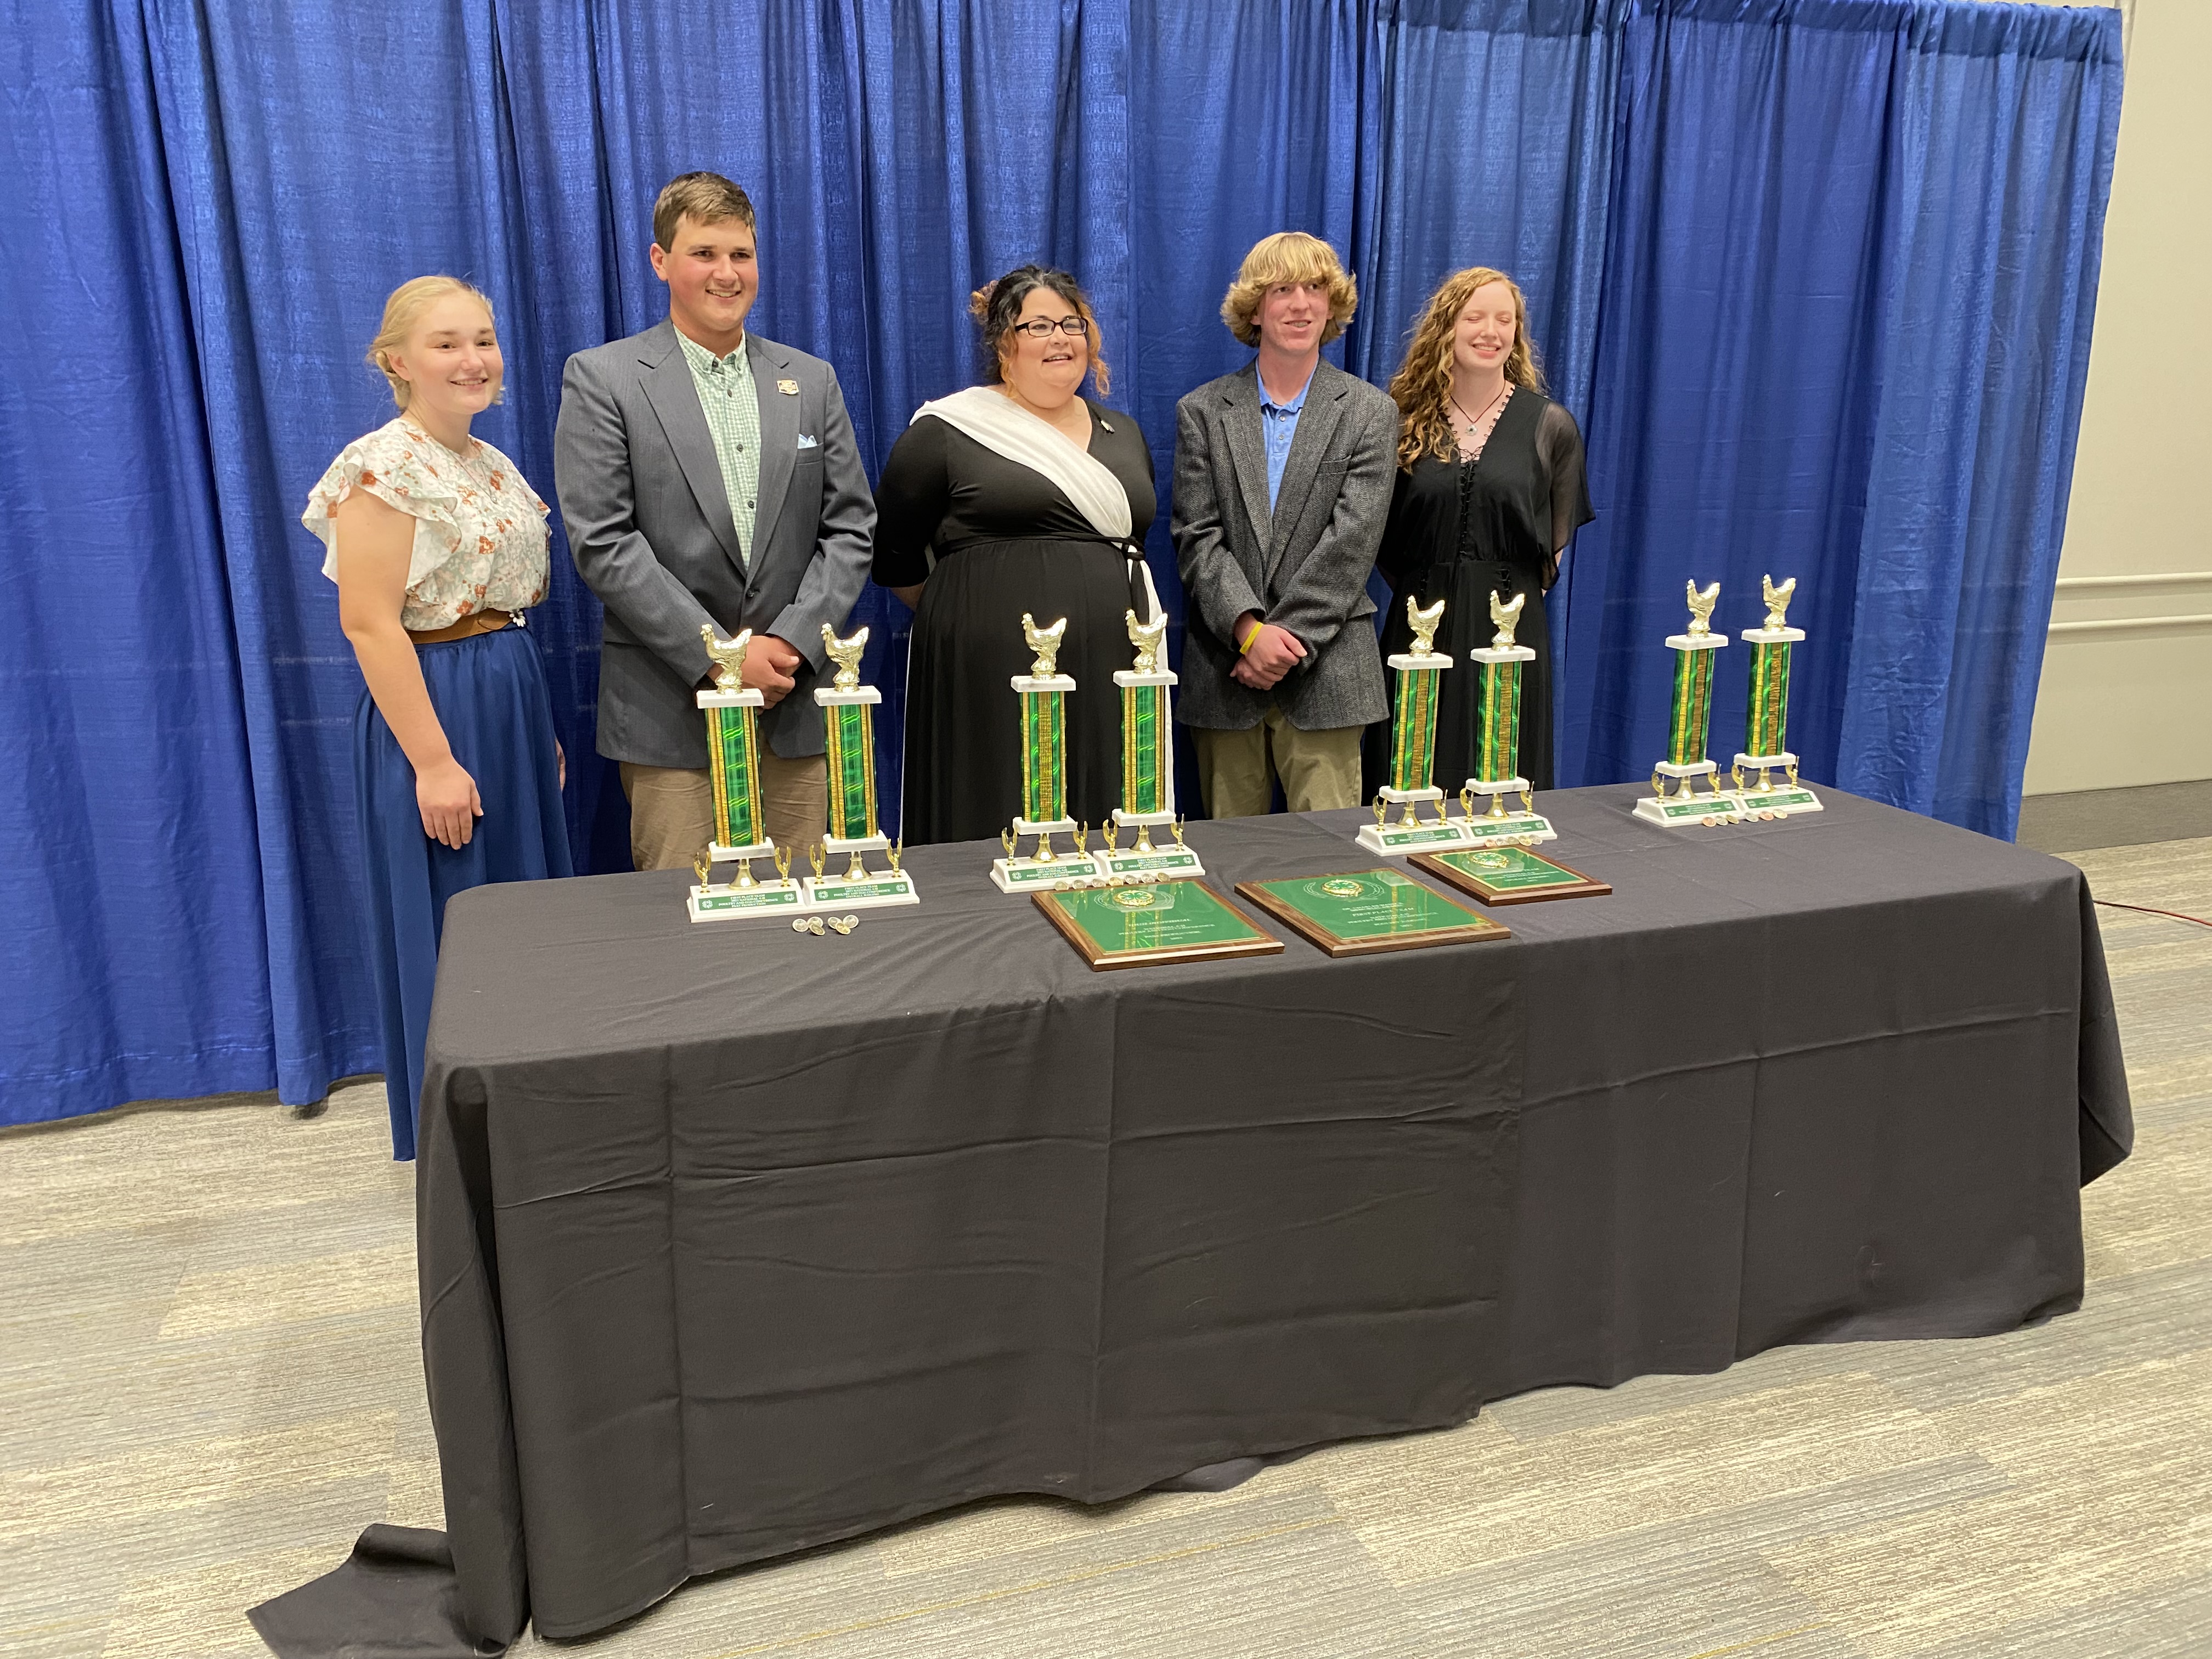 4-H Poultry Judging Team - 1st Place in Nation